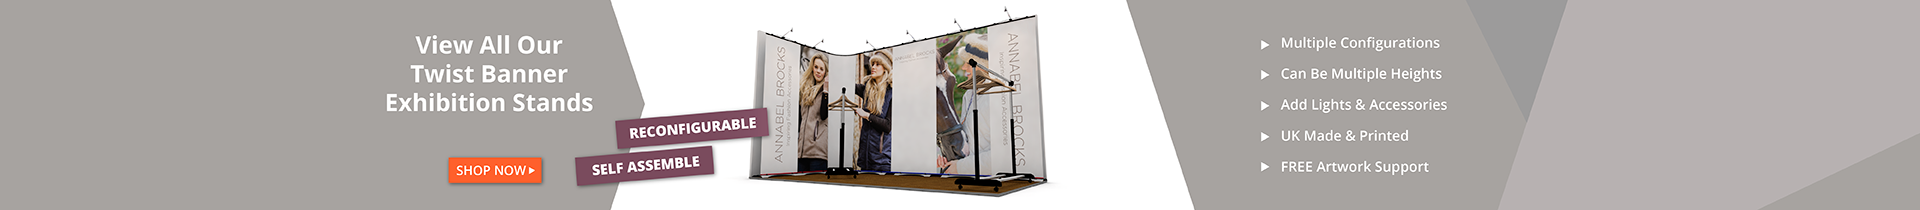 Twist Banners Exhibition Stands